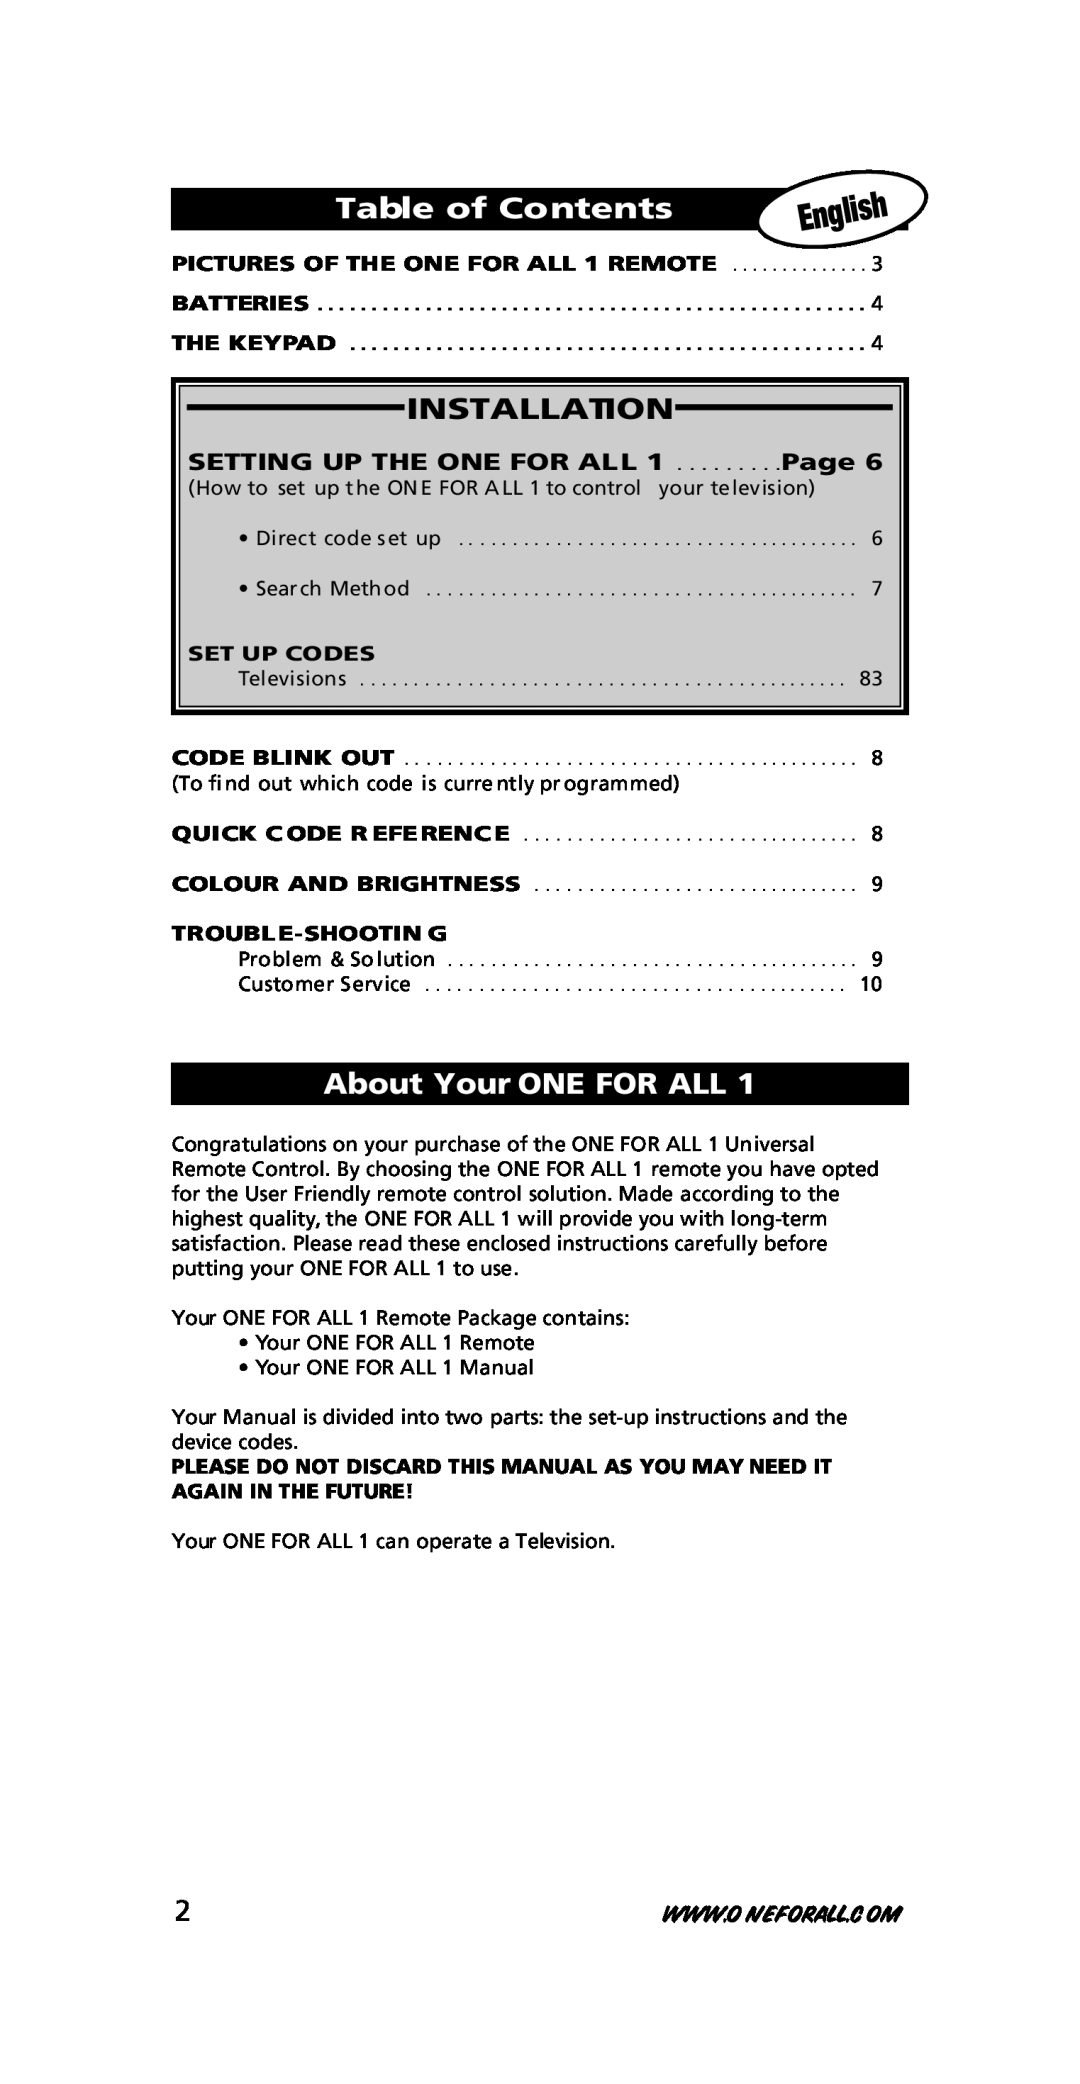 One for All URC-7711 Table of Contents, Installation, About Your ONE FOR ALL, Setting Up The One For All, Page 